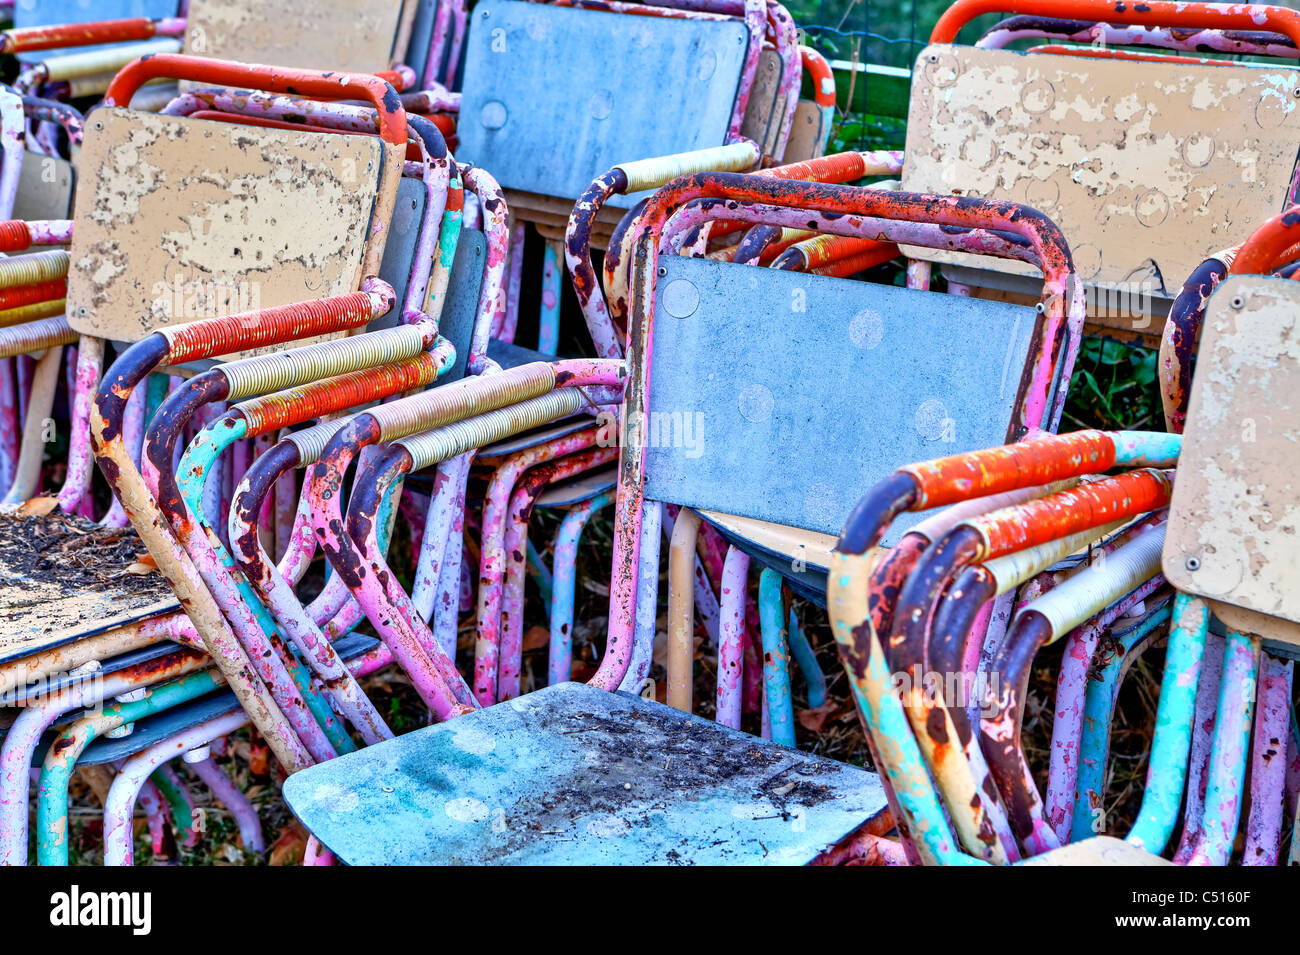 Colourful and rusty old chairs stacked Stock Photo